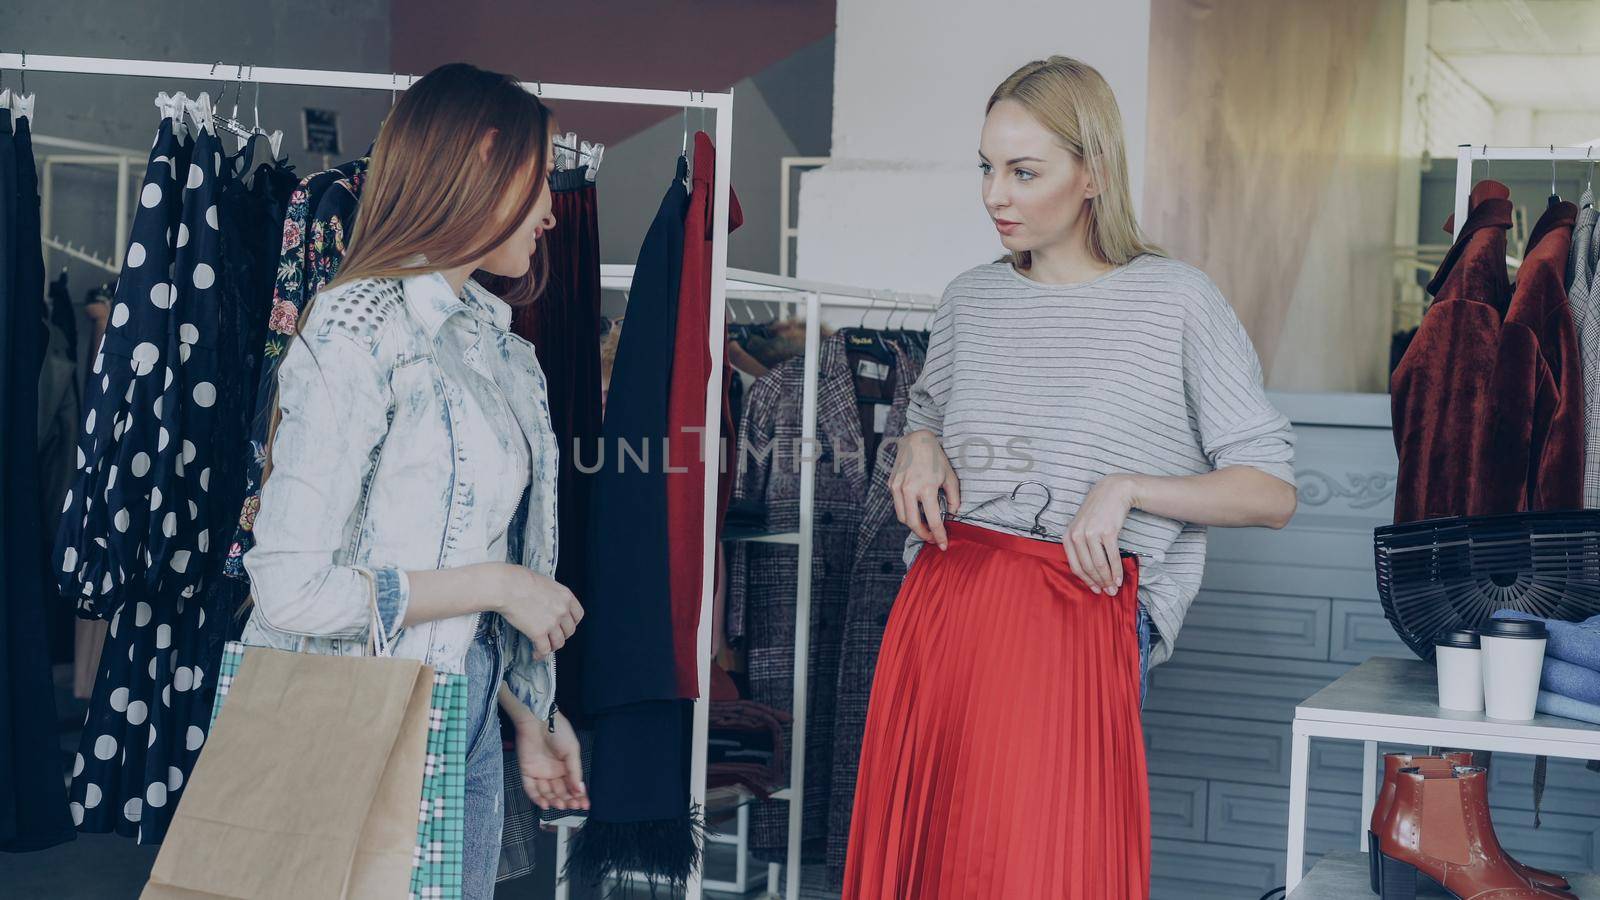 Girls are choosing clothes together while standing near rails in luxurious garments shop. They are taking skirt, fitting it to check its size and length, talking and gesturing.